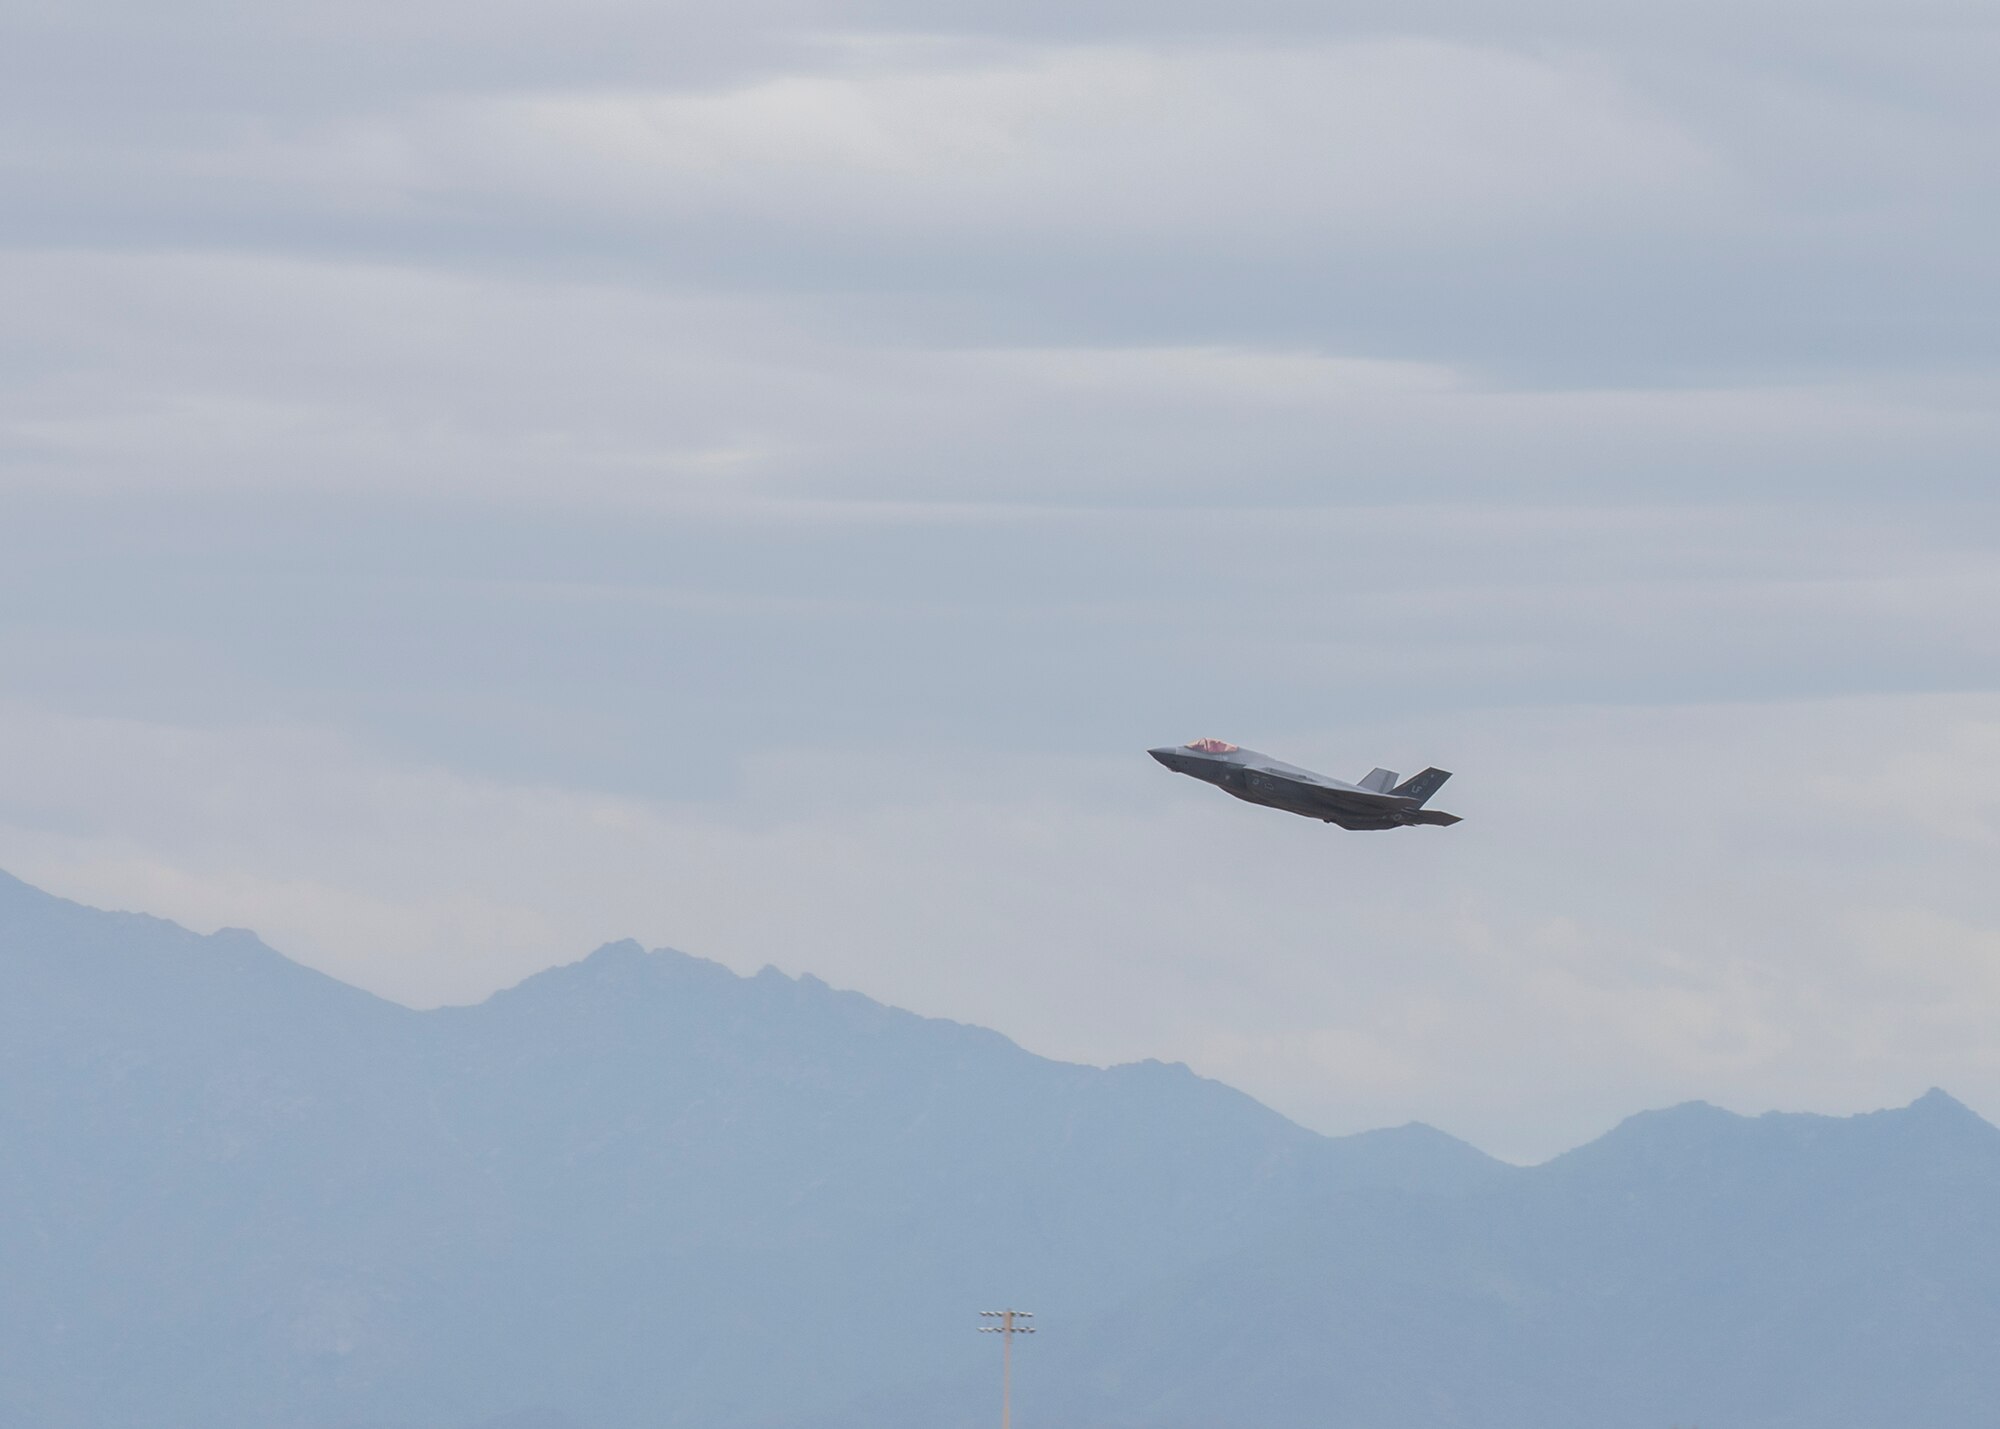 An F-35A Lightning II, assigned to the 62nd Fighter Squadron, takes off March 10, 2020 at Luke Air Force Base, Ariz.